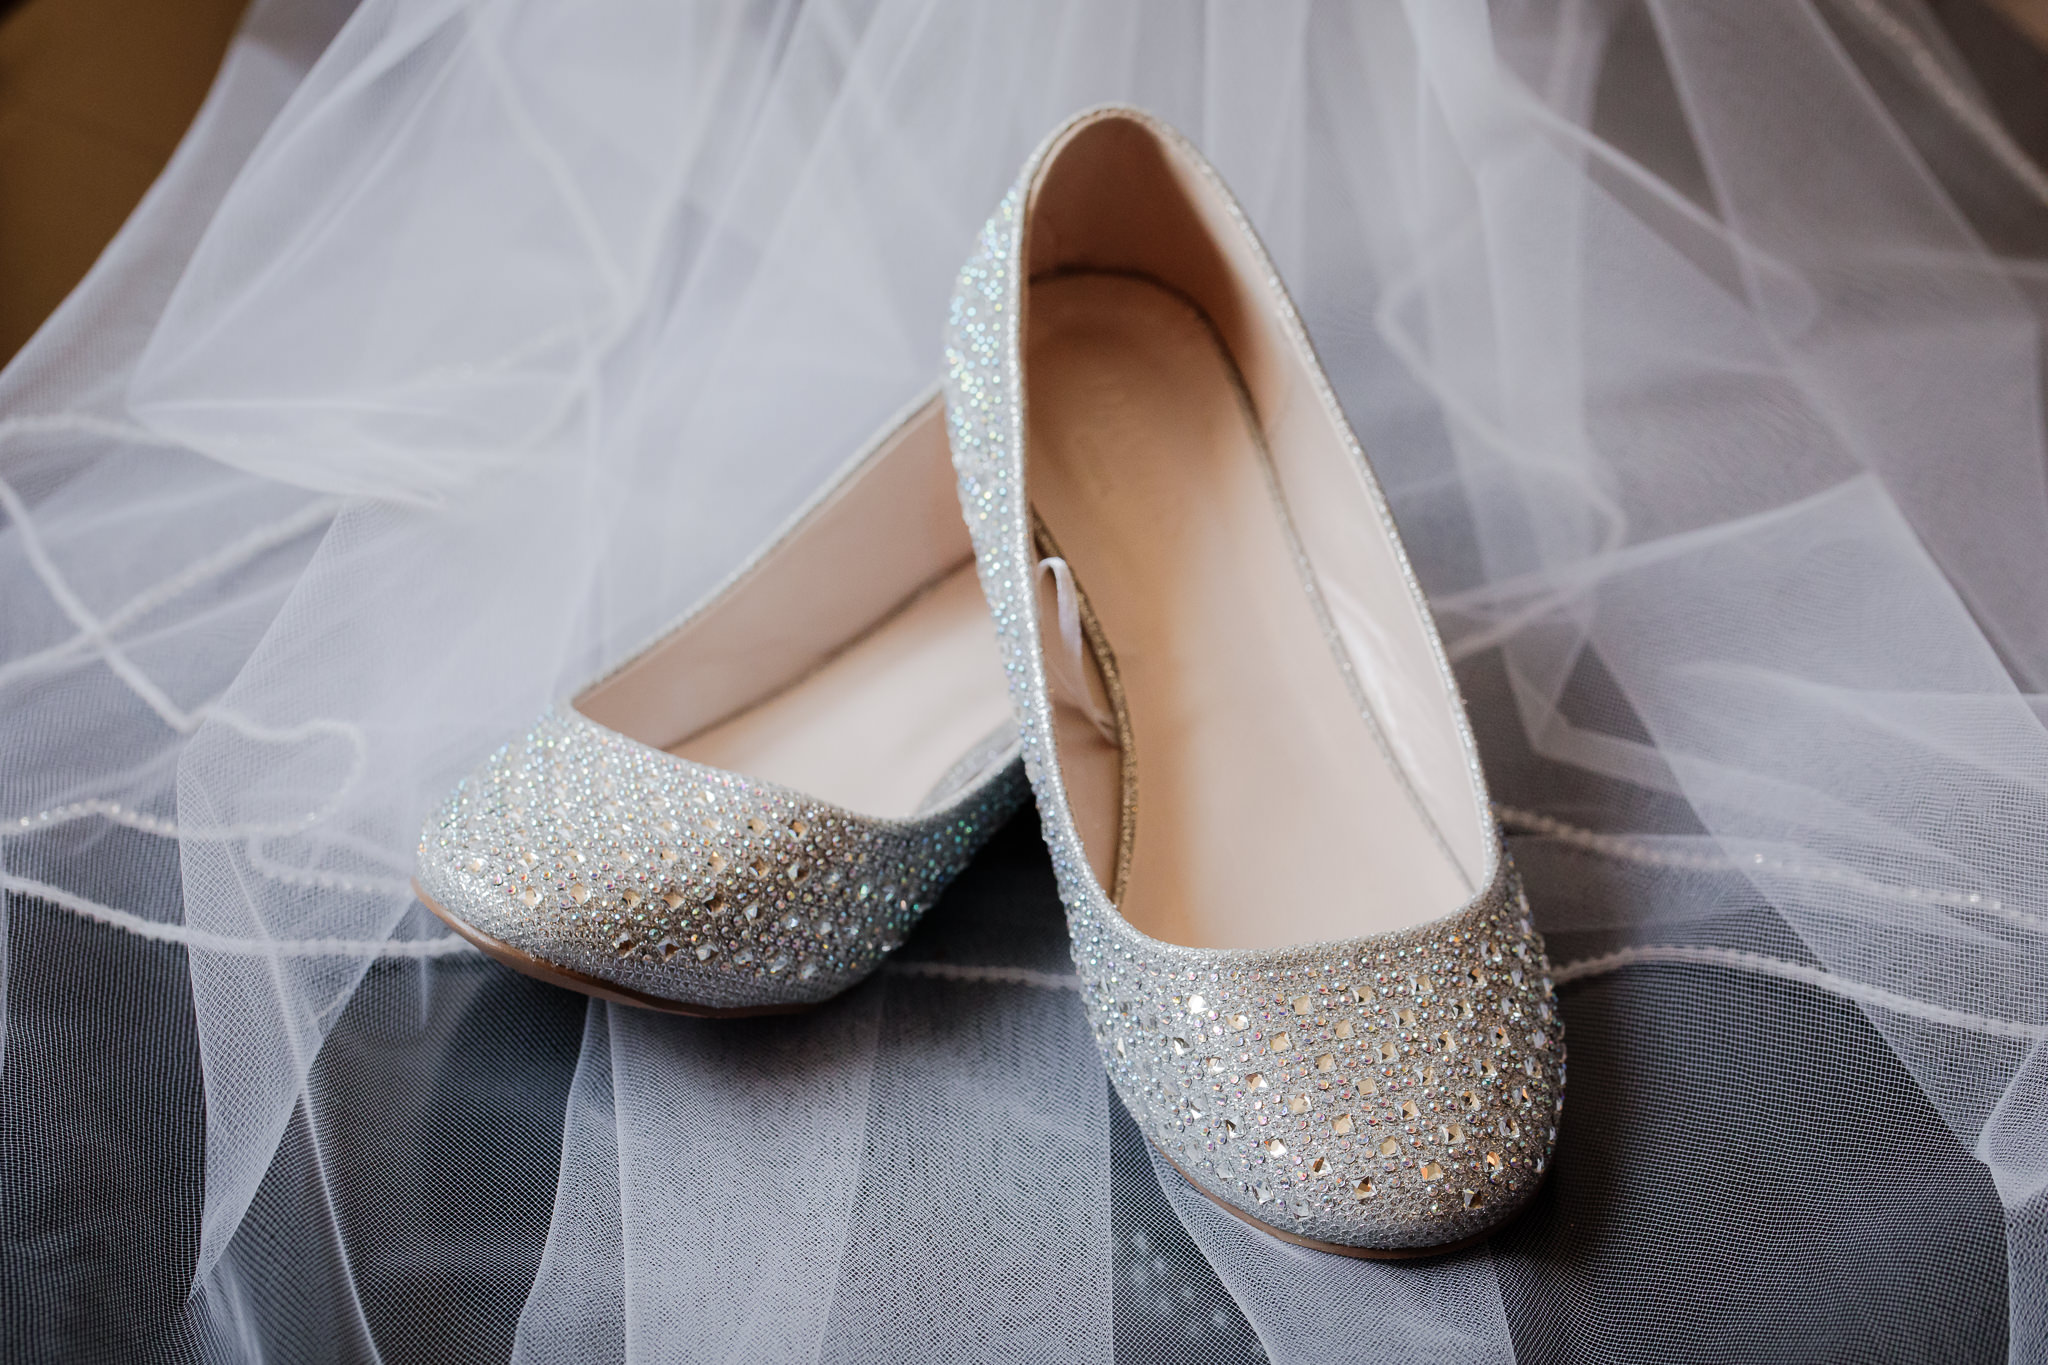 Bride's silver flat wedding shoes sit on her white veil